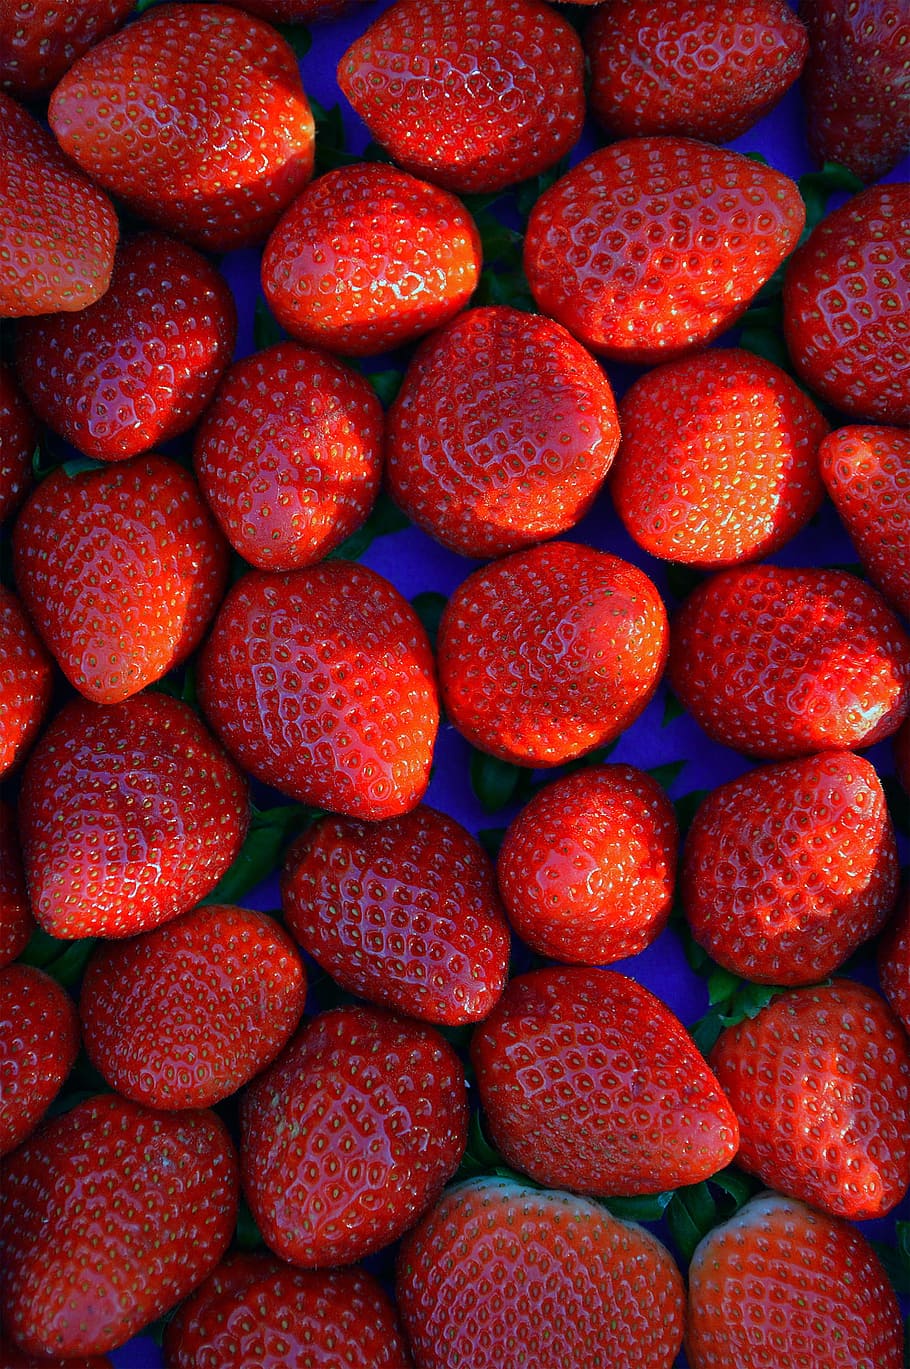 2560x800px. free download. HD wallpaper: Strawberry, Red, Fruit, Strawberries, red strawberries, food